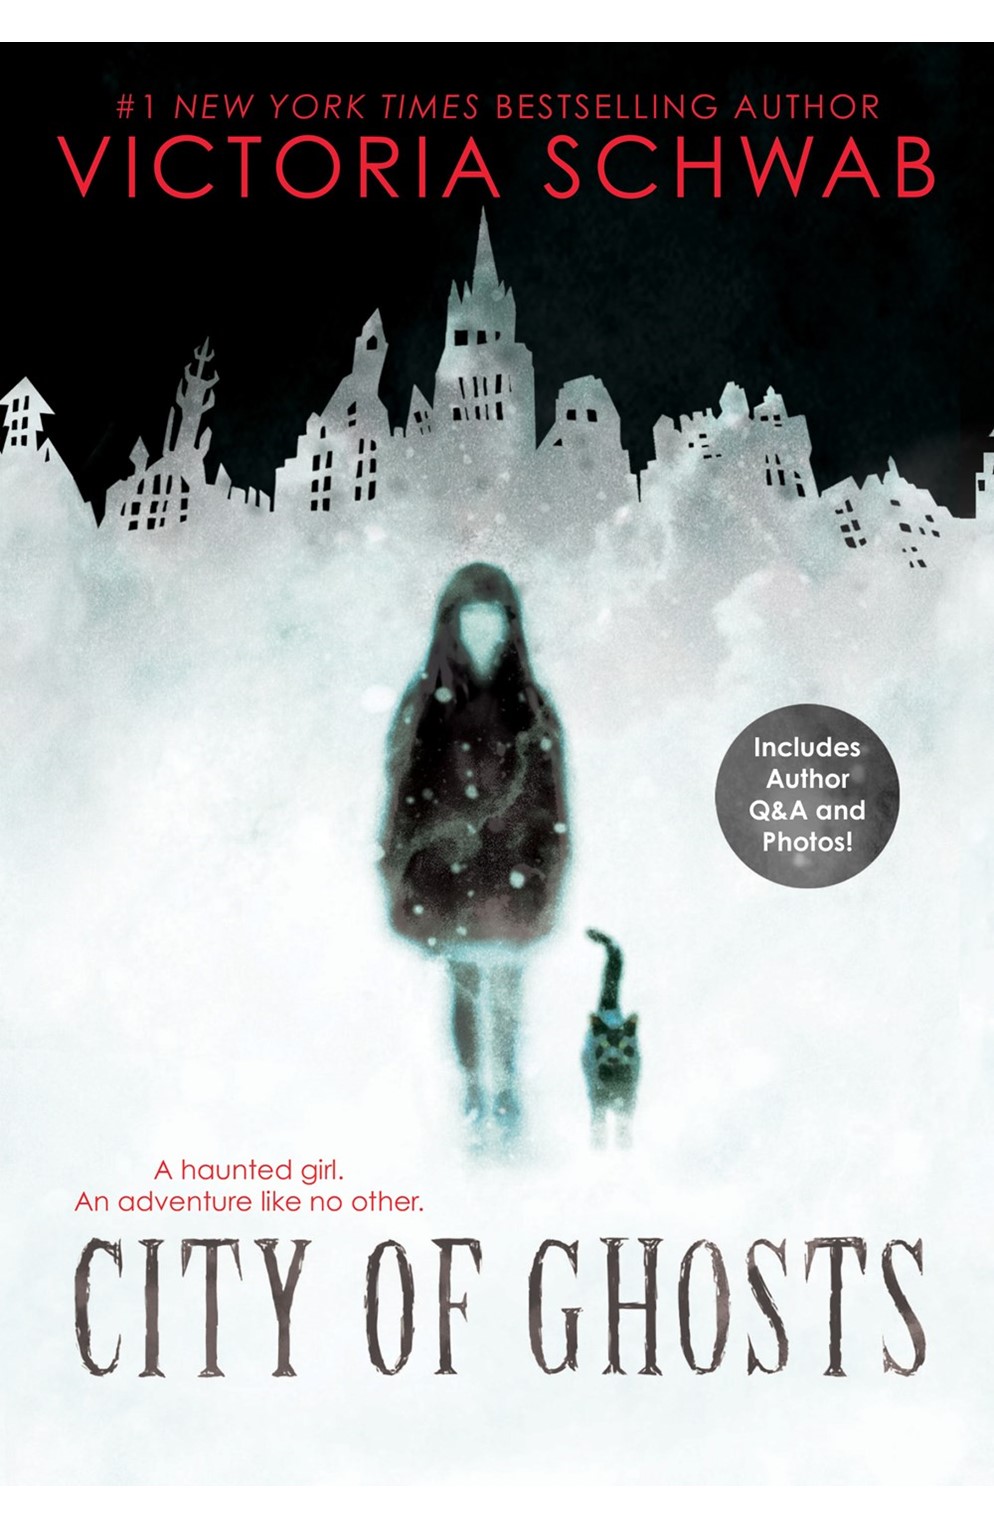 City of Ghosts Book Volume 1